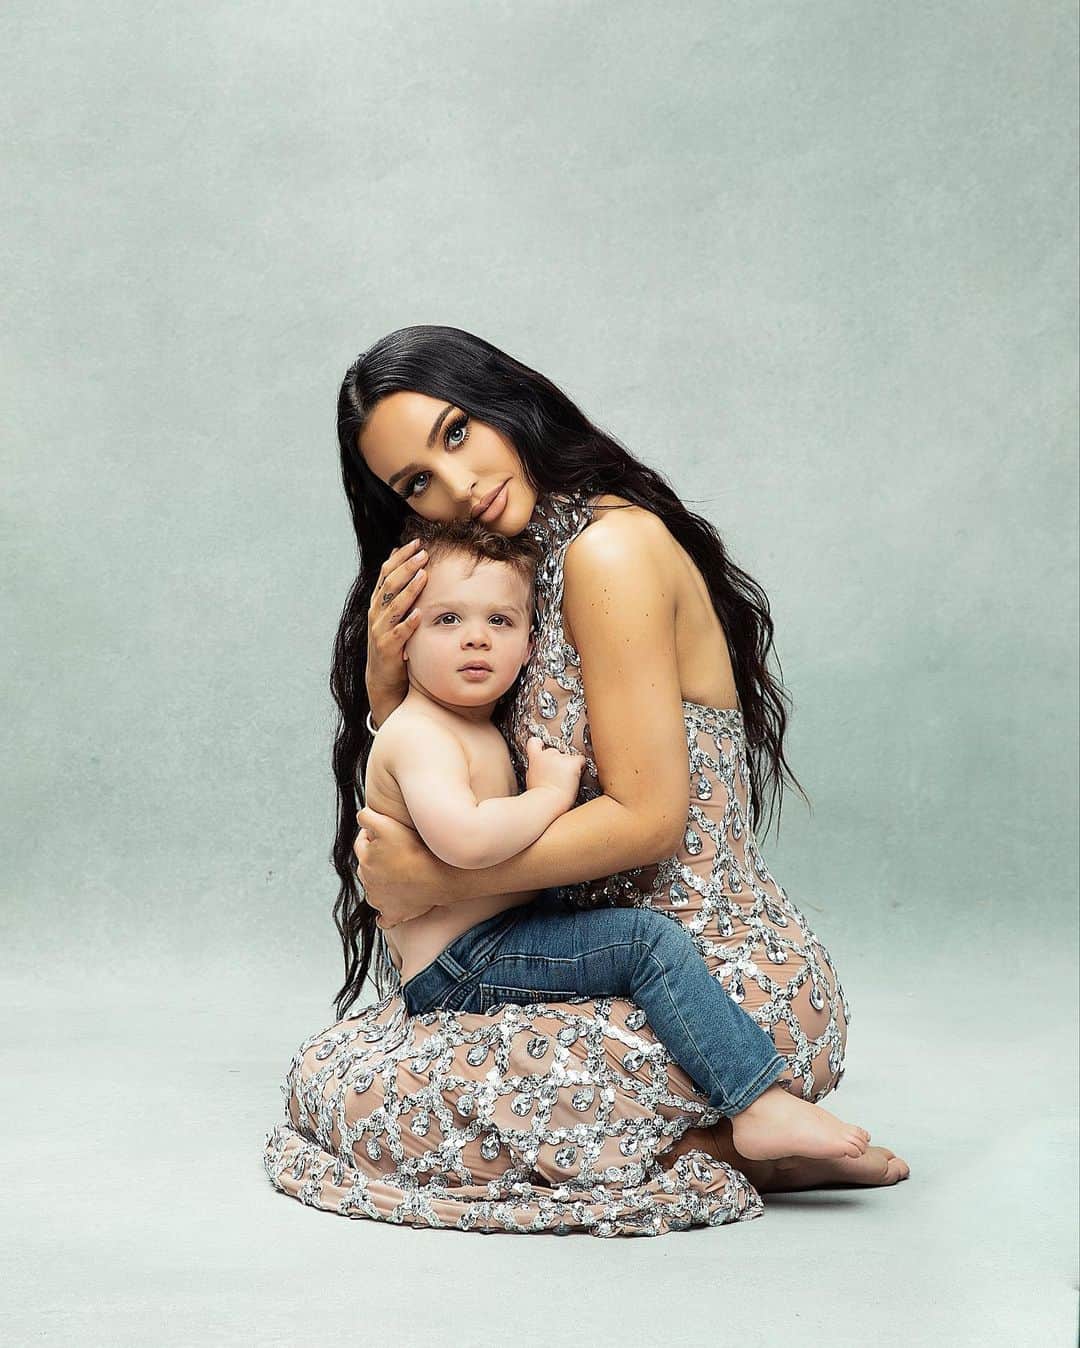 Carli Bybelのインスタグラム：「how is my baby 𝓽𝔀𝓸 today🥹🥹🥹🥹 happy birthday to the sweetest, most gentle soul. the light of my life💫 you make me proud to be your Mommy every single day. love you HAPPPEH angel boy🥳🎂  📸 @jolieameliephotography」